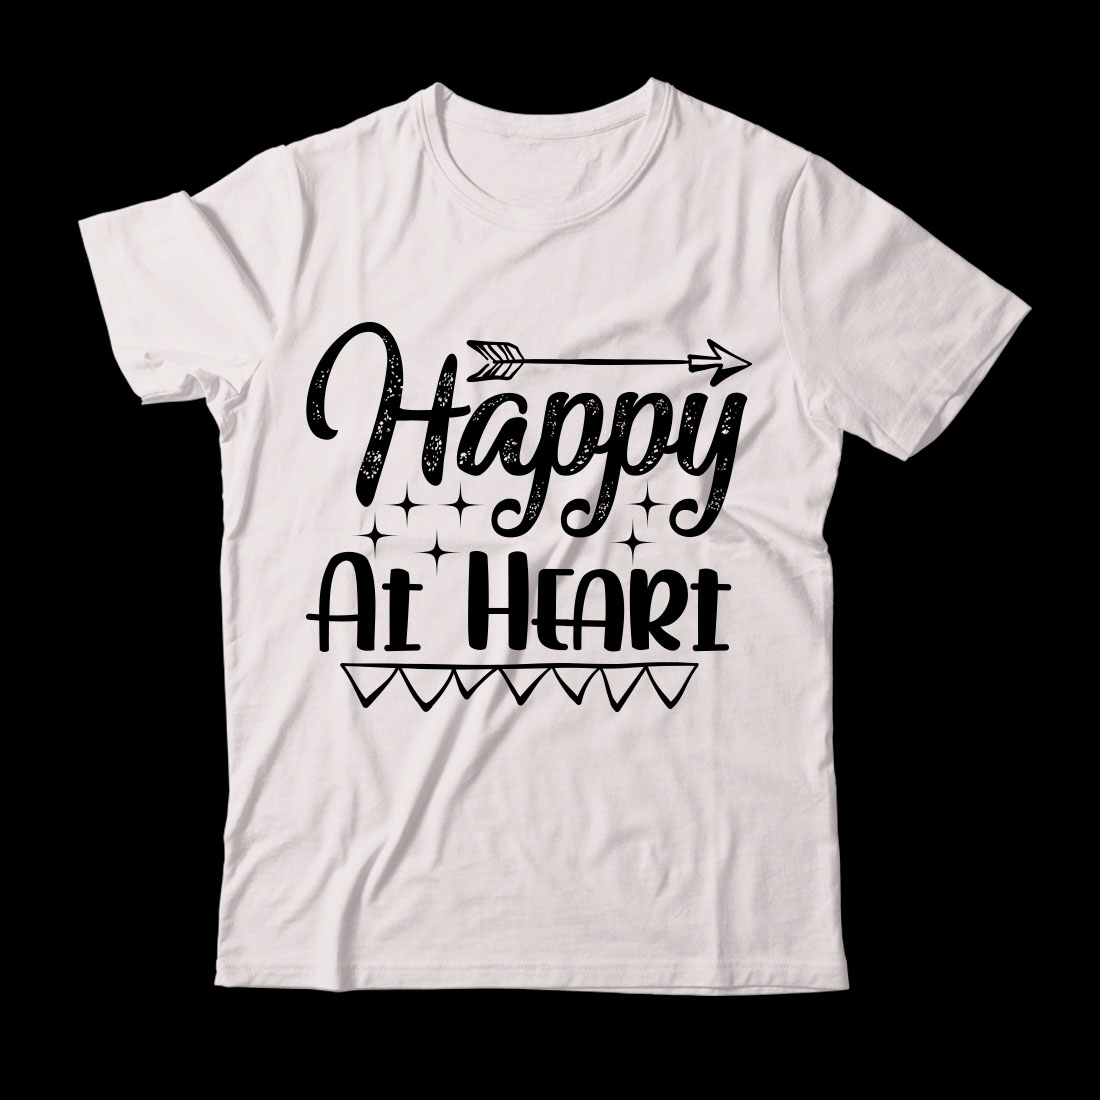 White t - shirt that says happy at heart.